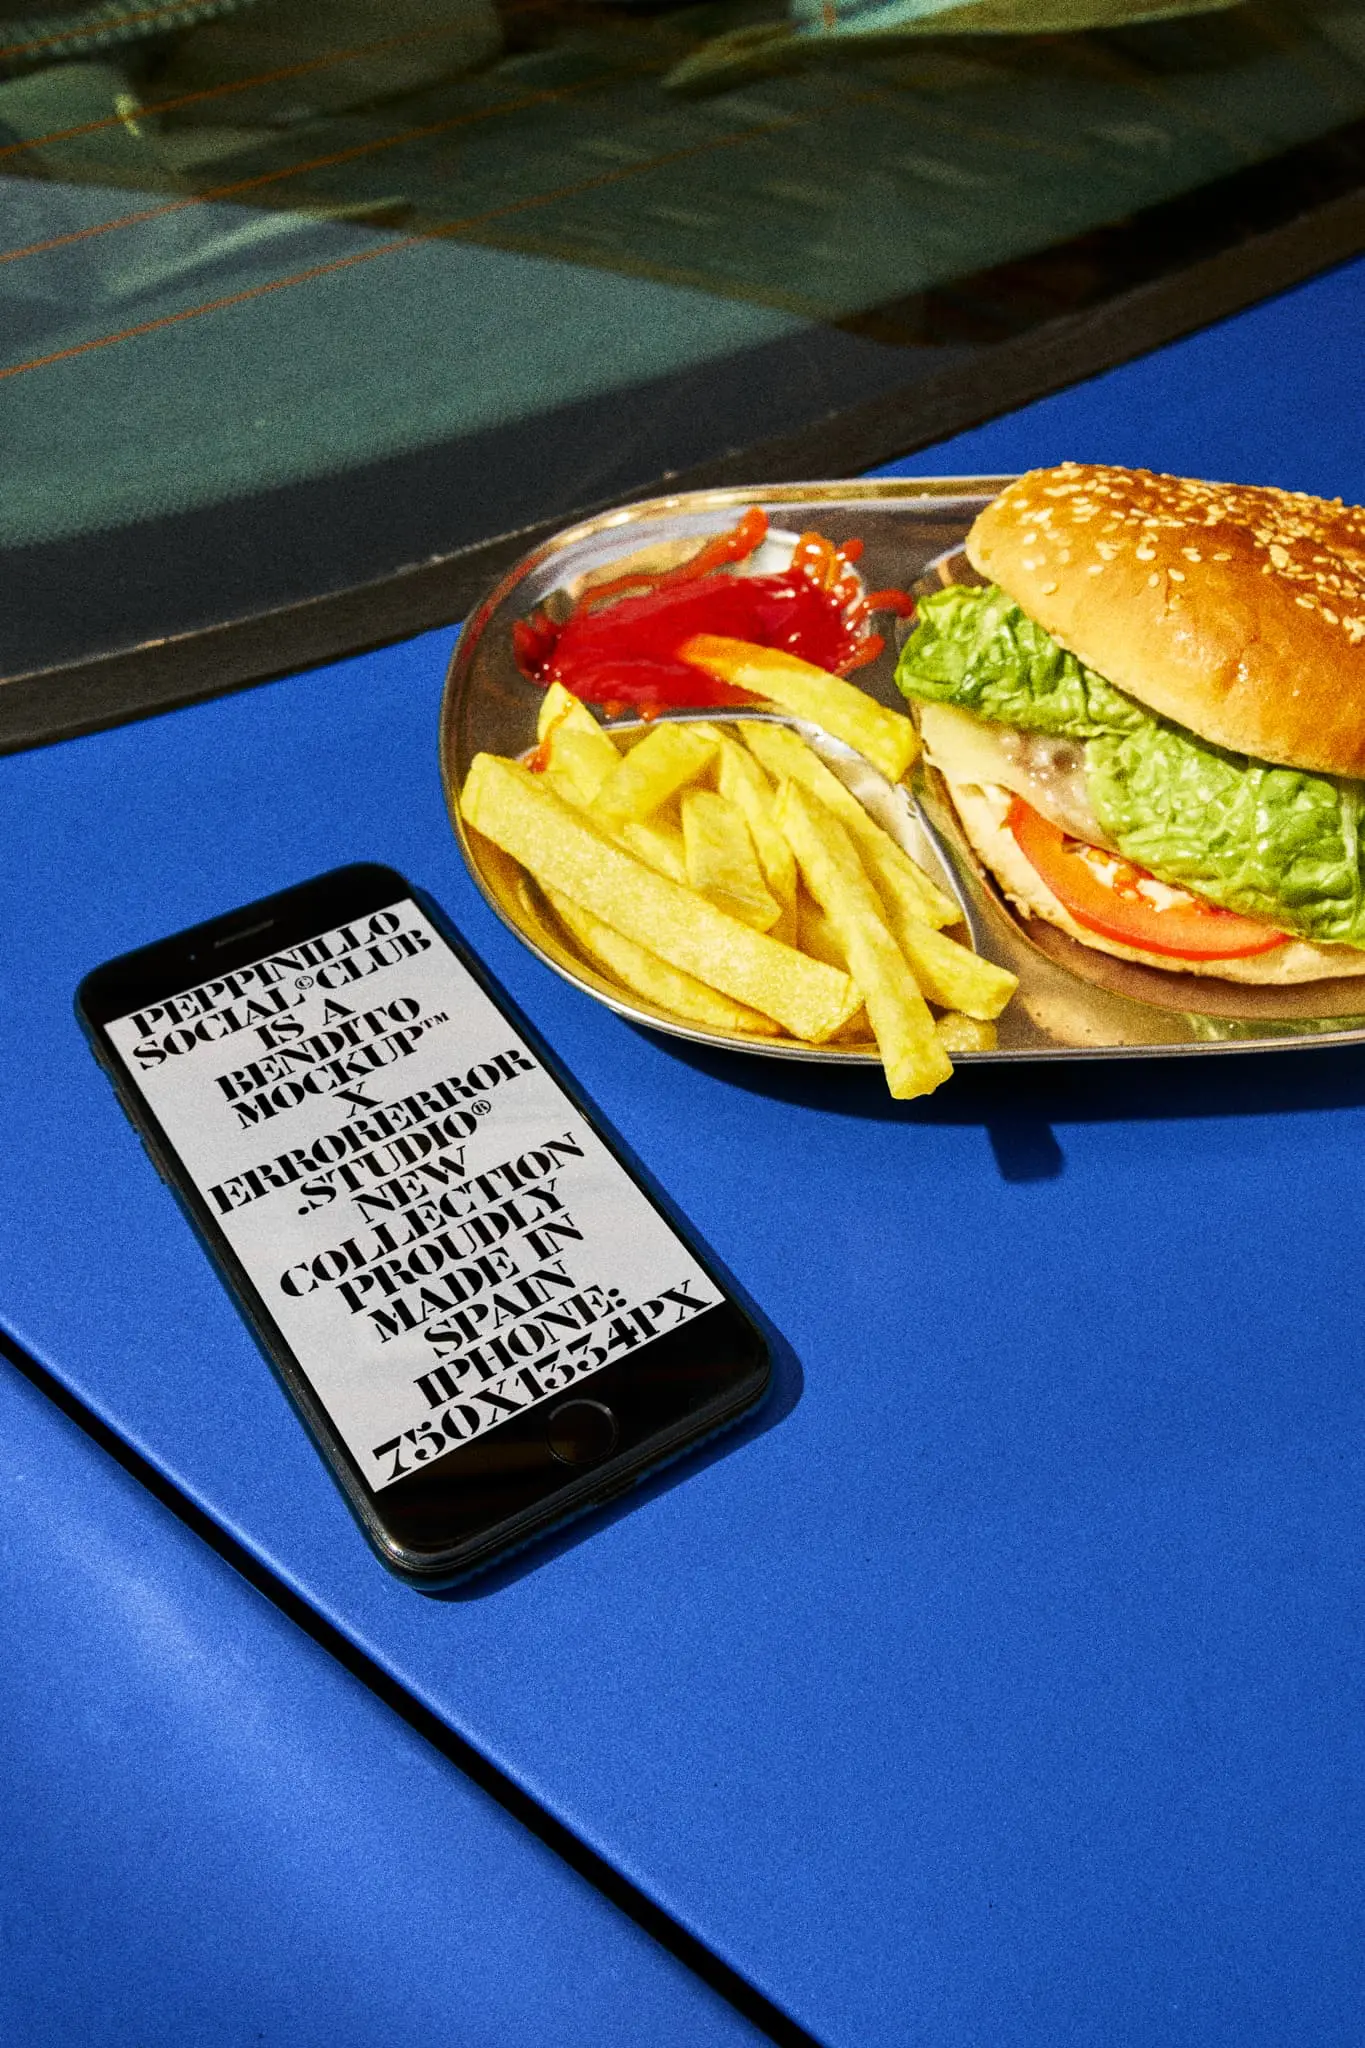 iPhone mockup next to a plate with a hamburger and fries over the hood of a blue car in the parking of a take-away restaurant. Device mockup. iPhone PSD file. Premium quality iPhone mockup. iPhone PSD high-quality editable file.